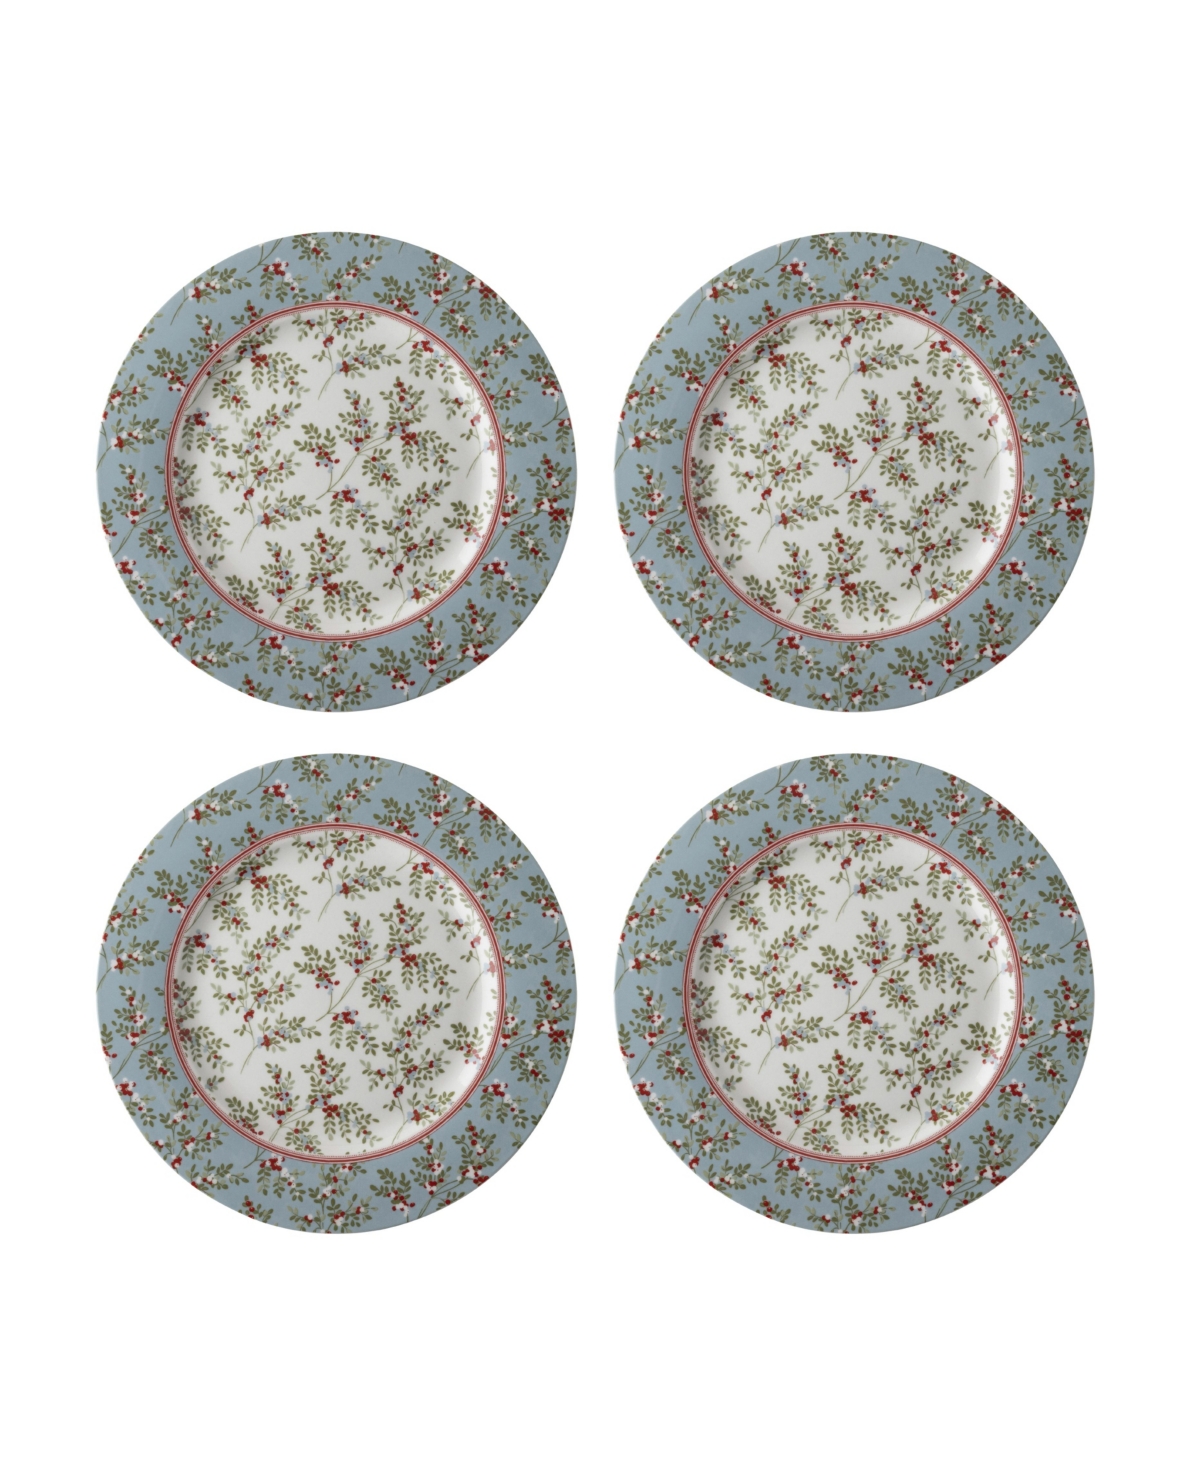 Laura Ashley Plates Stockbridge Collectables Gift Set, 4 Piece In Blue